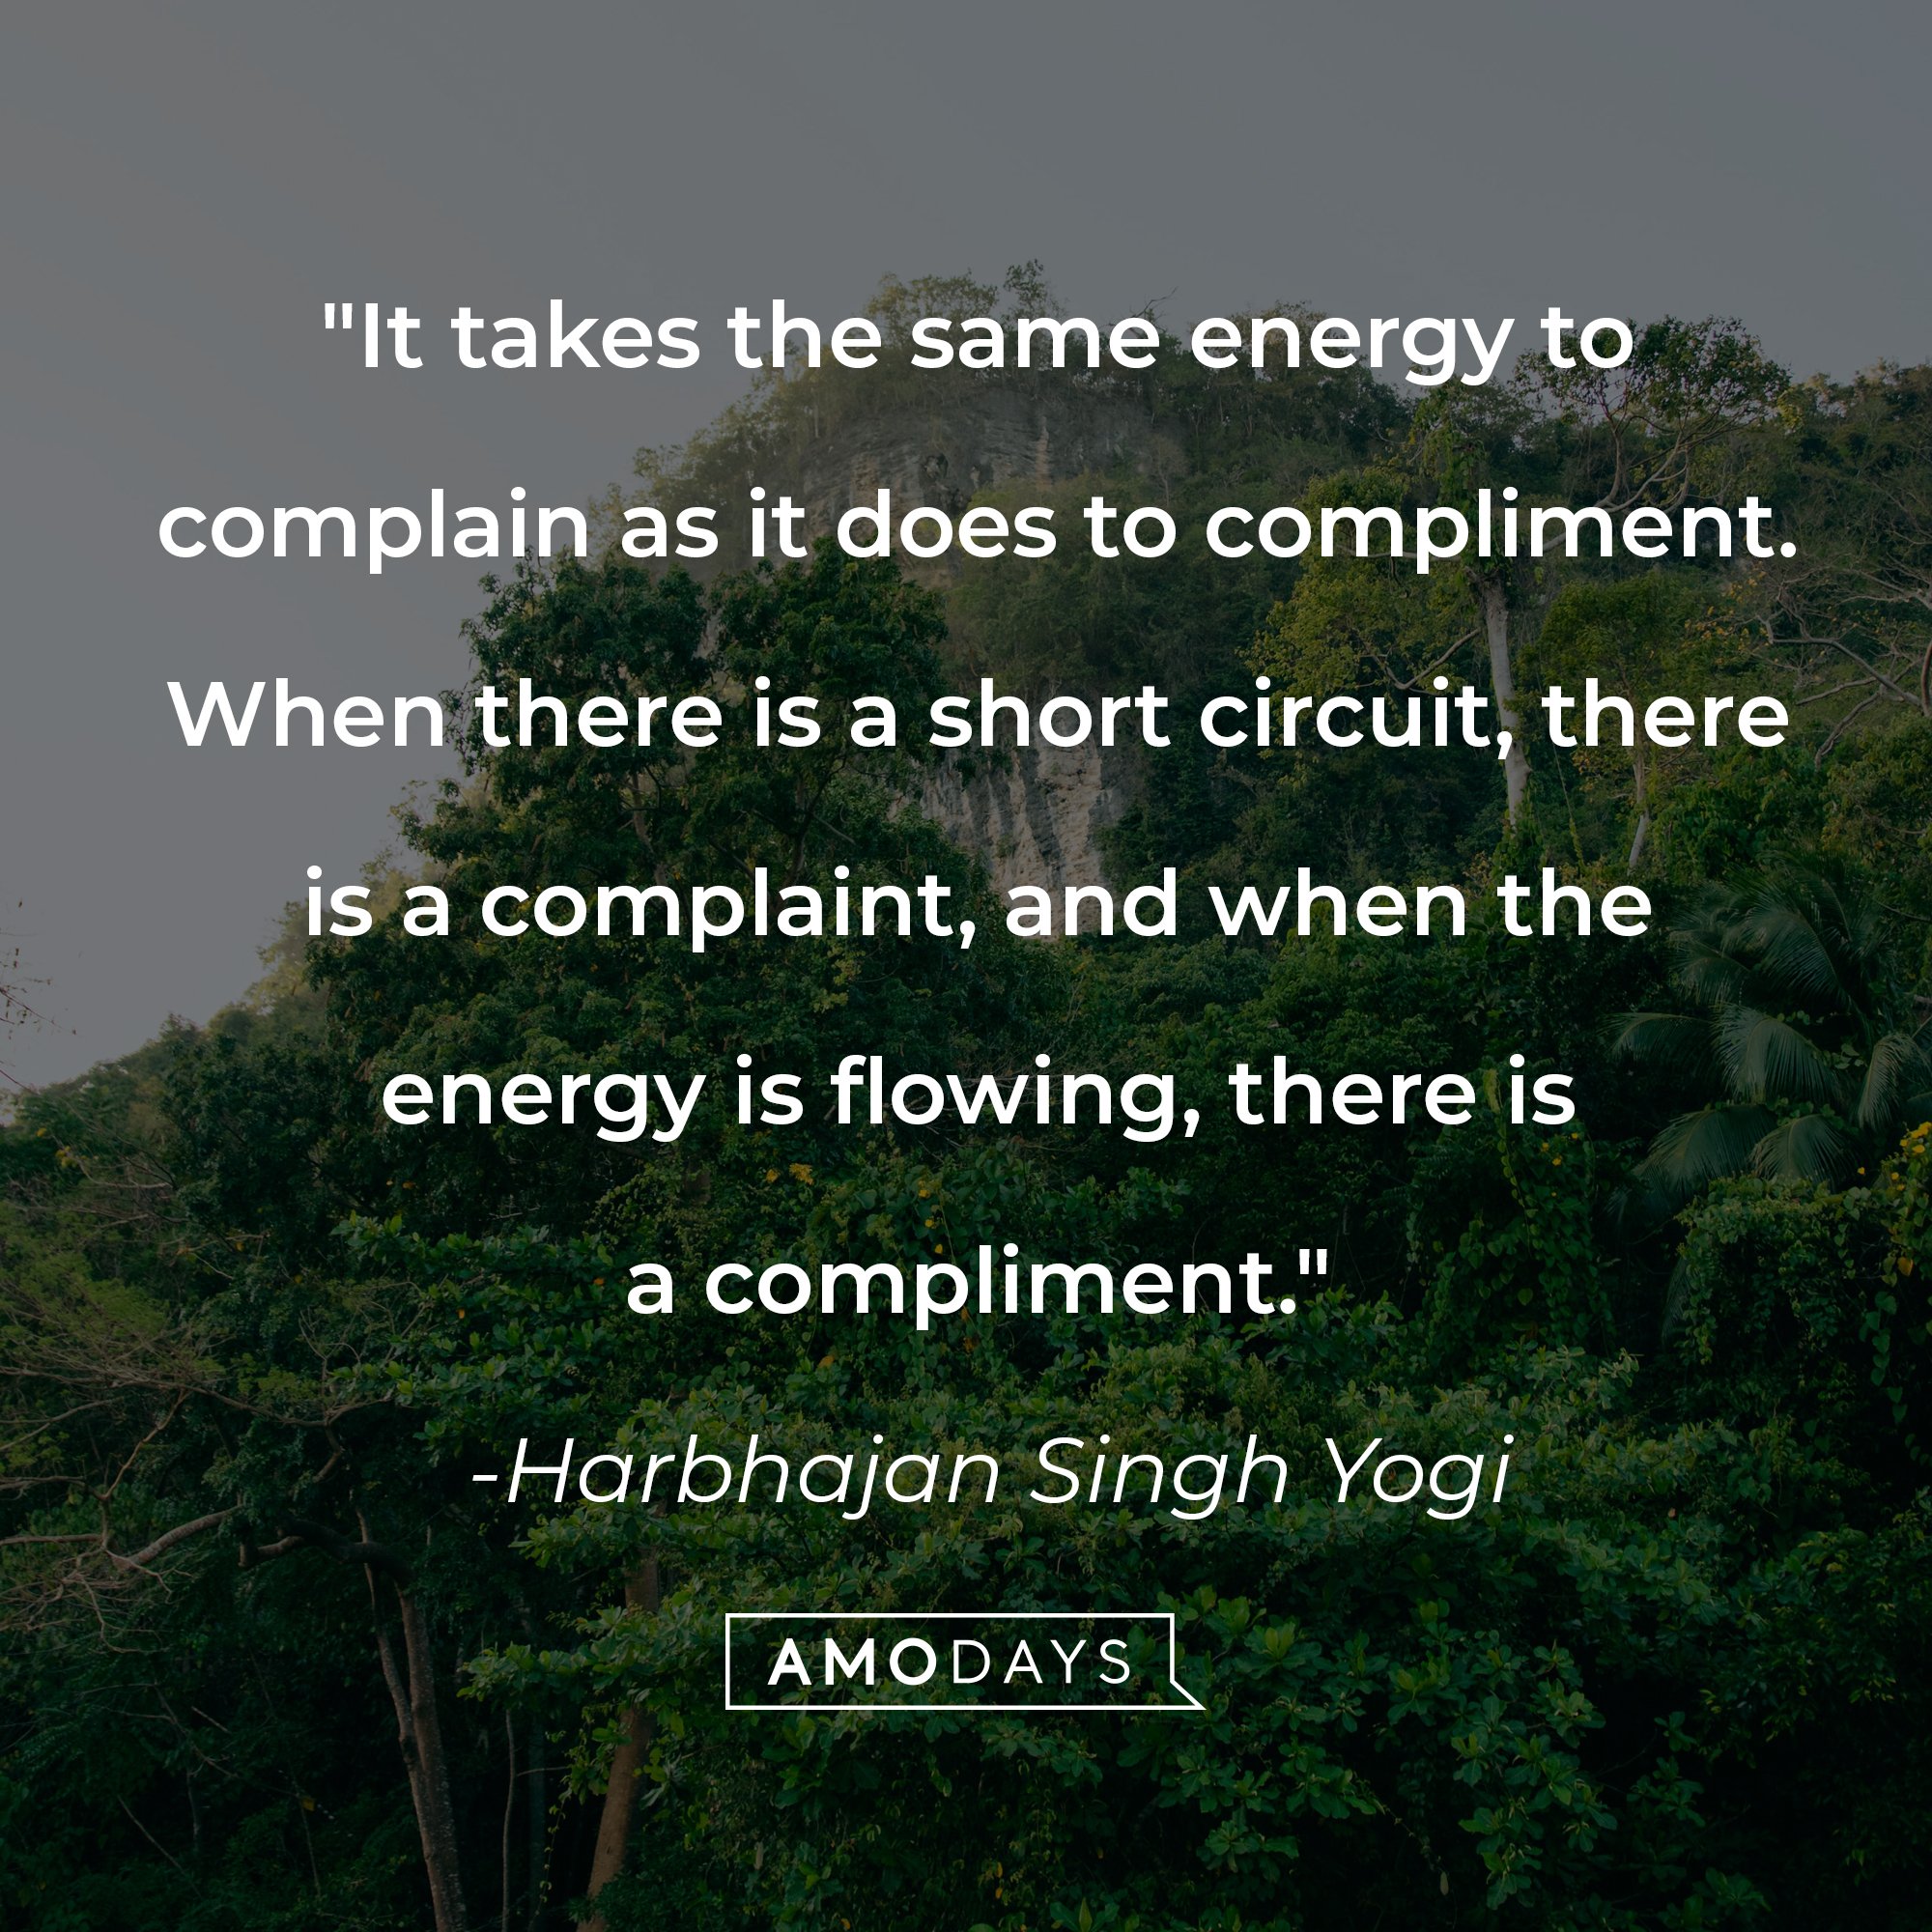 Harbhajan Singh Yogi's quote: "It takes the same energy to complain as it does to compliment. When there is a short circuit, there is a complaint, and when the energy is flowing, there is a compliment." | Image: AmoDays